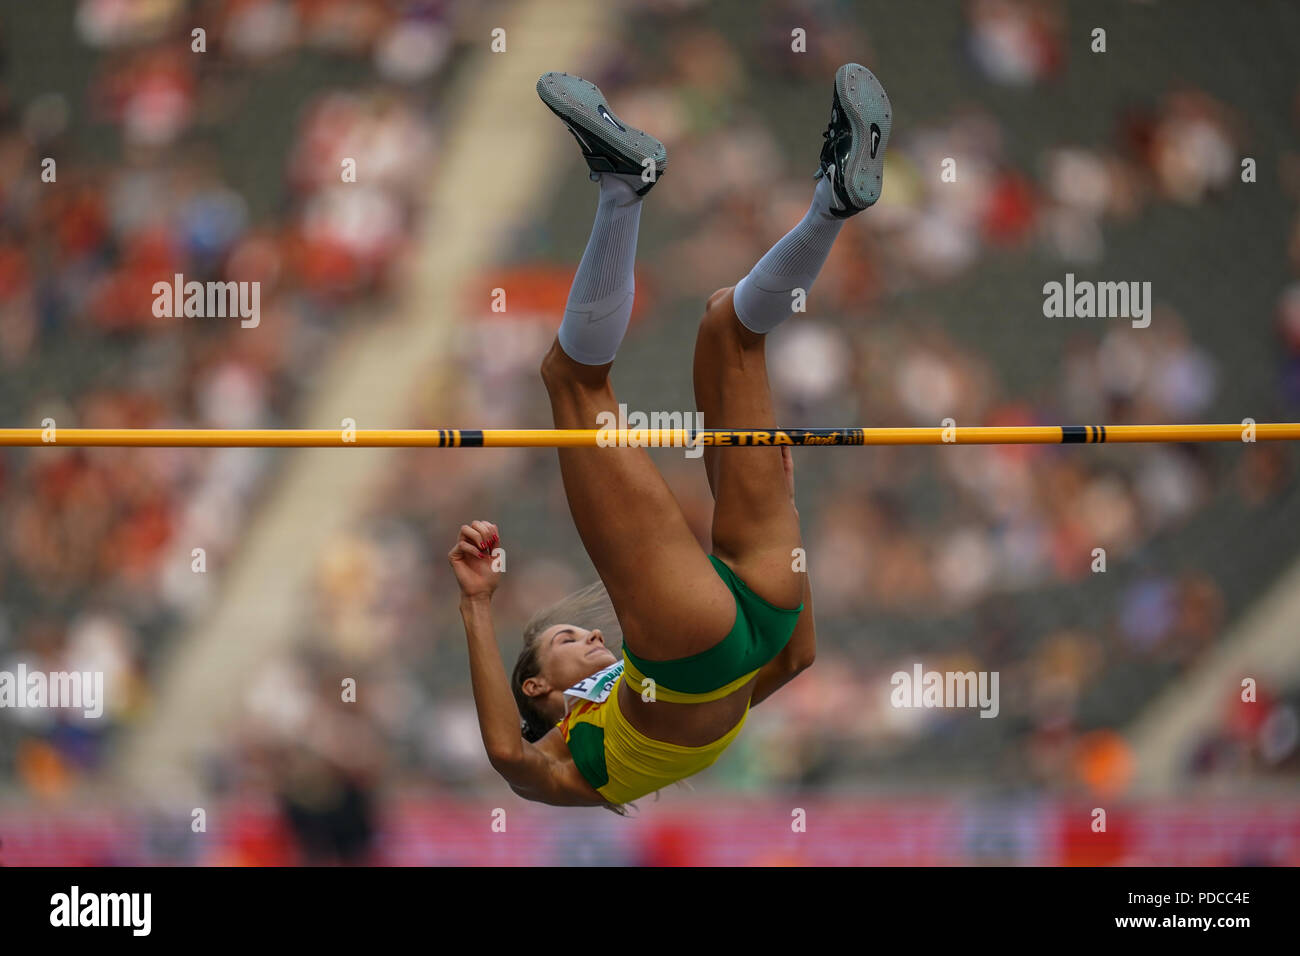 Berlin, Germany. August 8, 2018: Airine Palsyte of Lithuania during High jump qualification for women at the Olympic Stadium in Berlin at the European Athletics Championship. Ulrik Pedersen/CSM Credit: Cal Sport Media/Alamy Live News Stock Photo